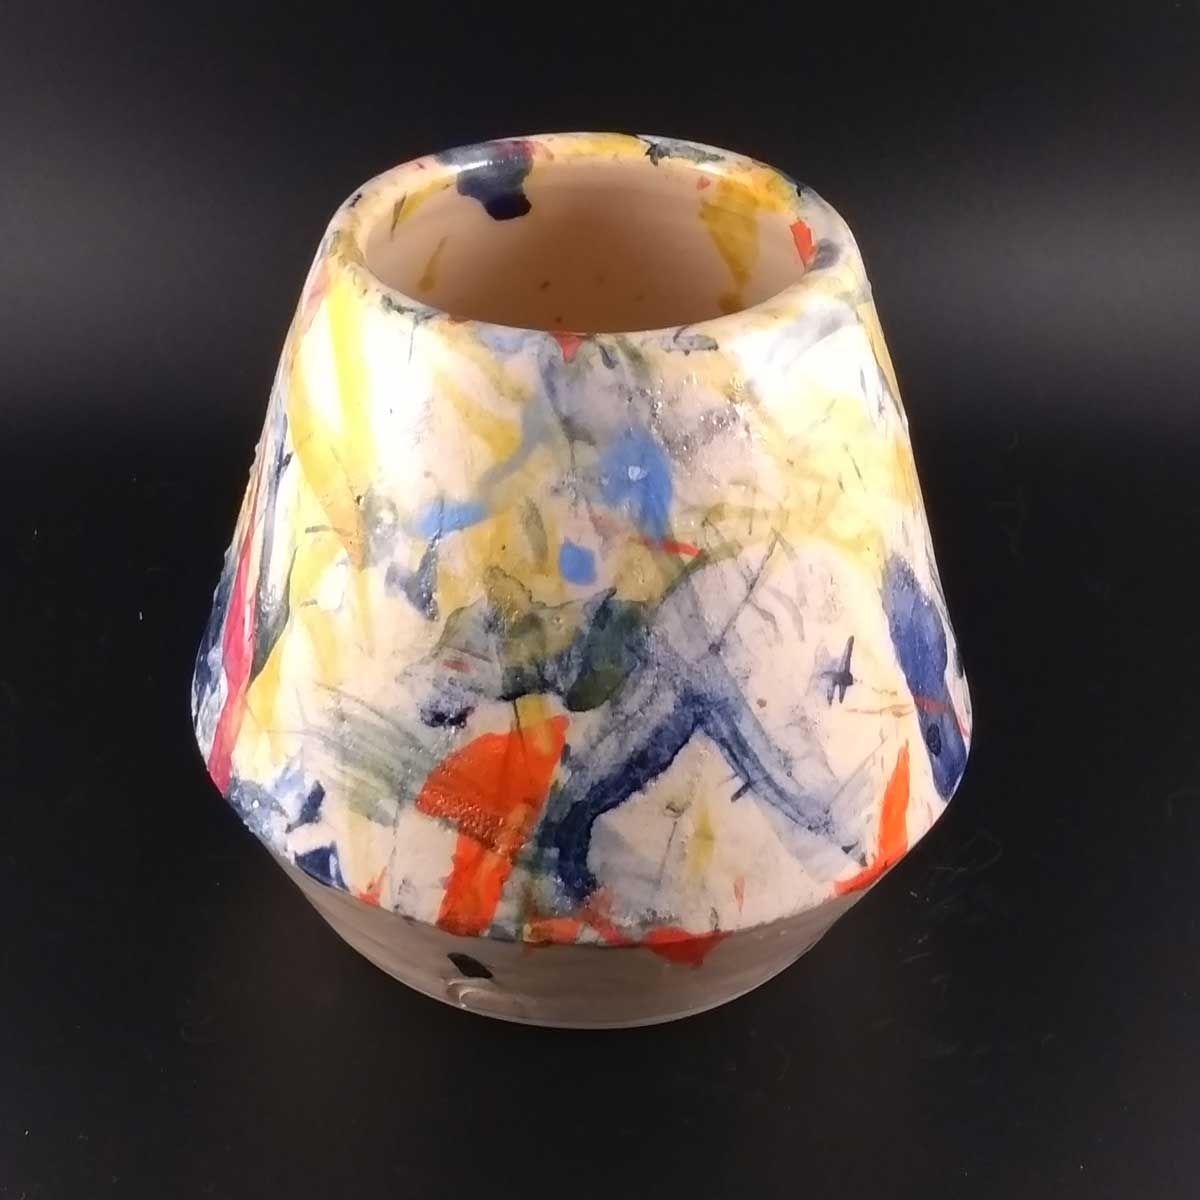 Image of a geometric pot decorated with splashes of colour